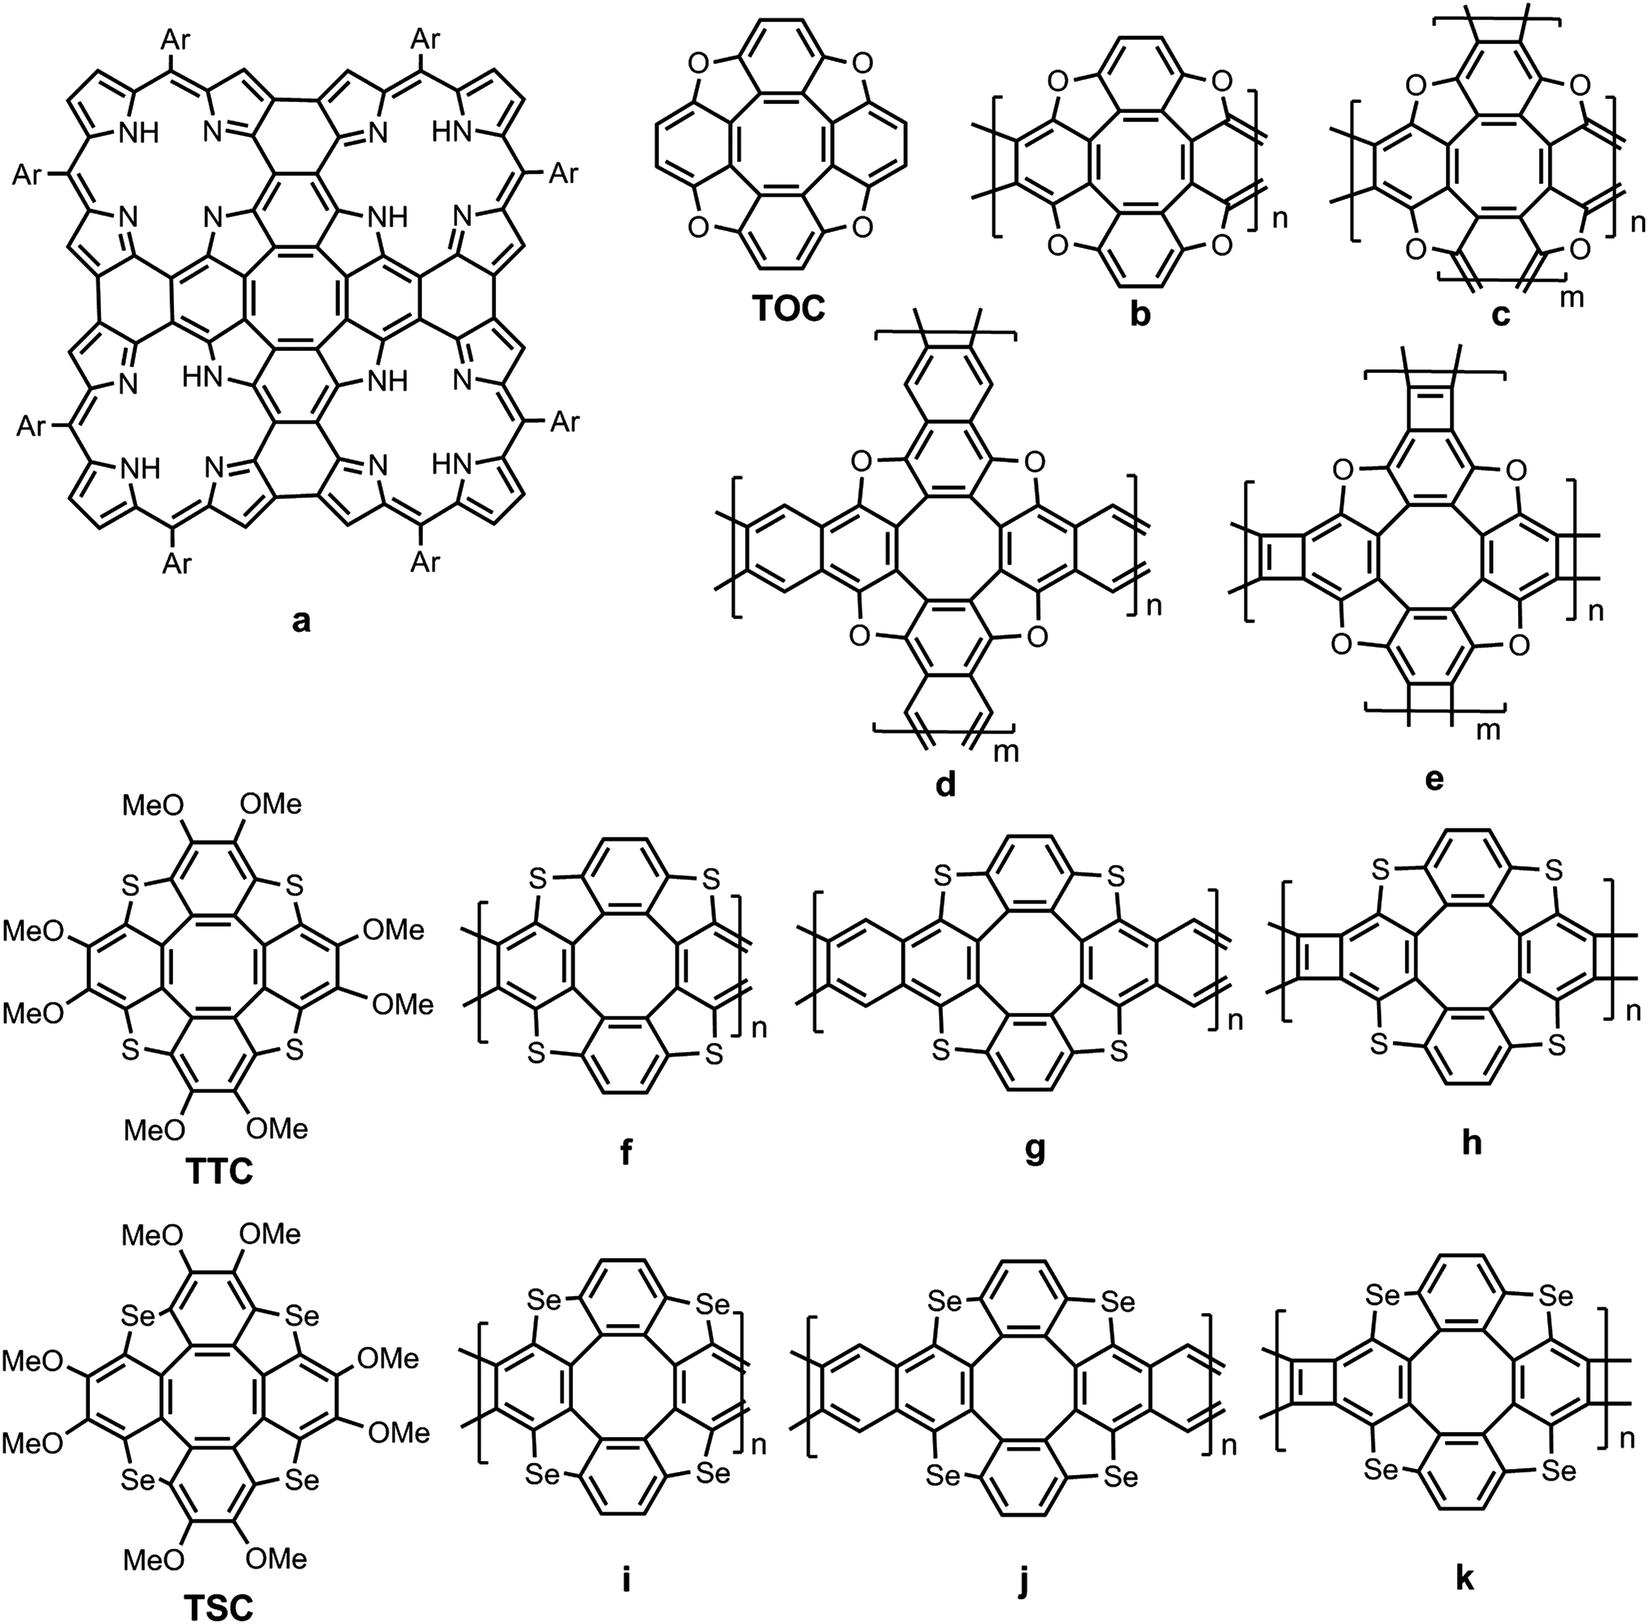 Structure Stability And Electronic Properties Of One Dimensional Tetrathia And Tetraselena 8 Circulene Based Materials A Comparative Dft Study New Journal Of Chemistry Rsc Publishing Doi 10 1039 D0nja